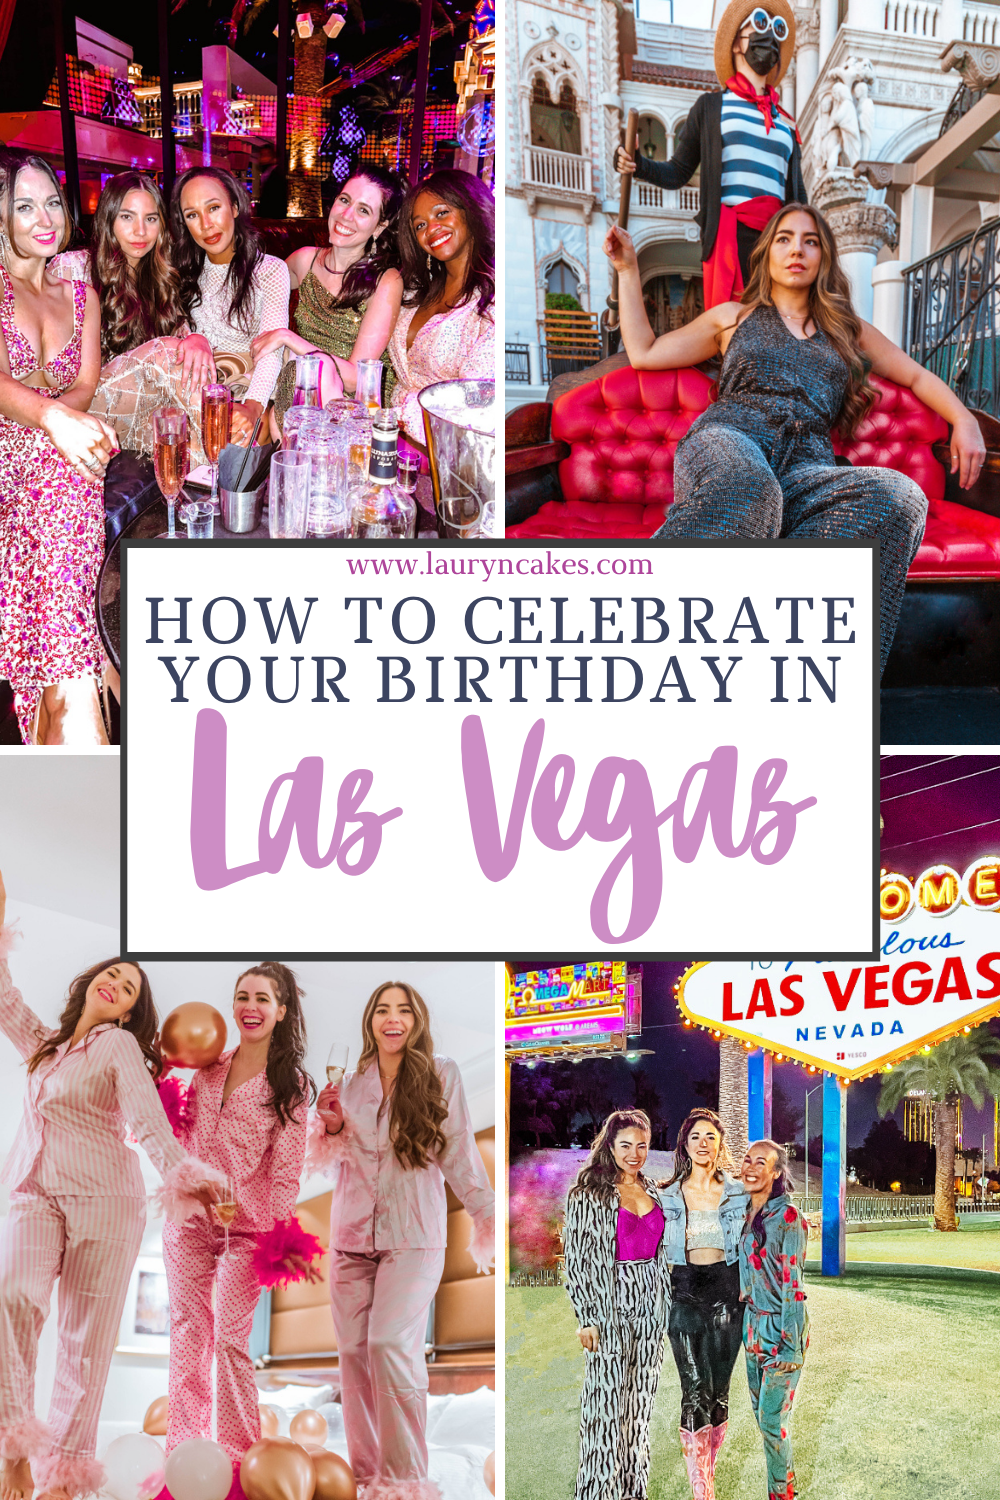 collage of women dressed up in four photos with text that says, "how to celebrate your birthday in Las Vegas"